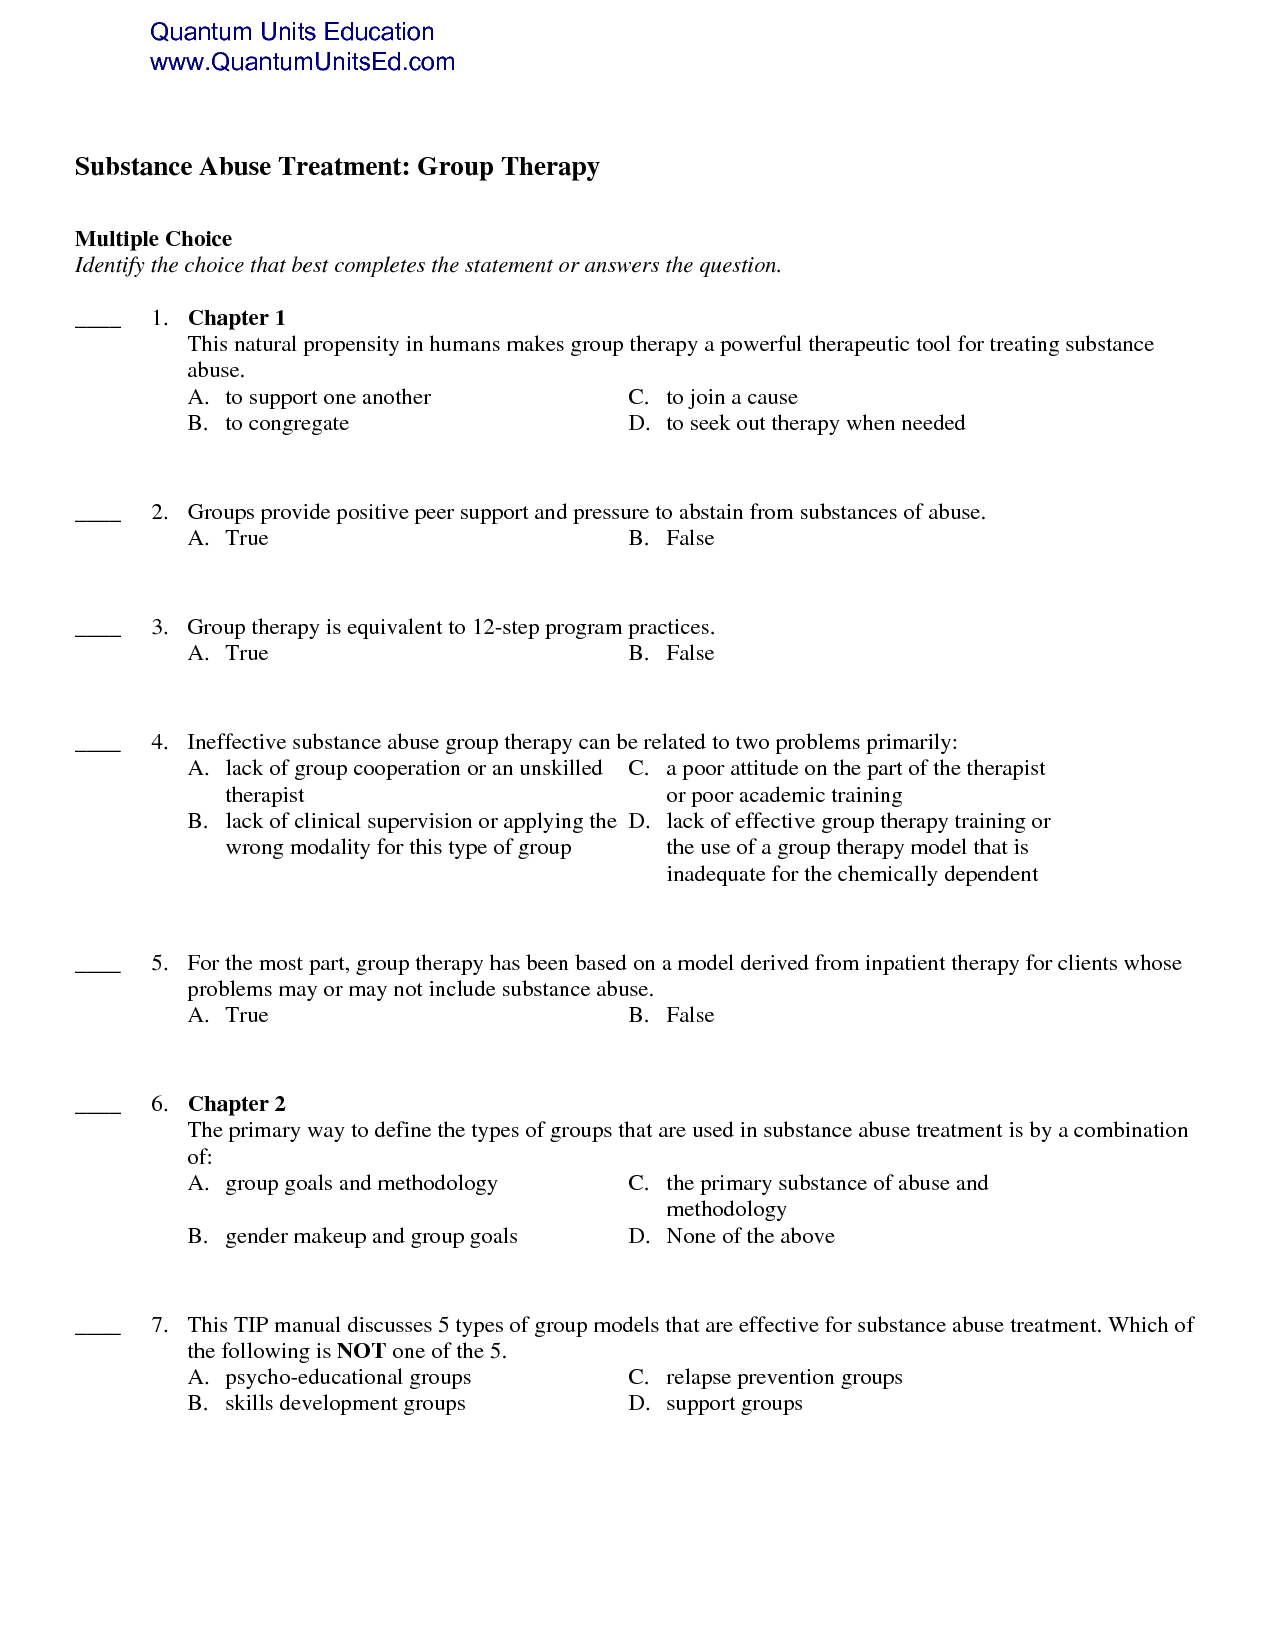 15-best-images-of-12-step-recovery-worksheets-narcotics-anonymous-db